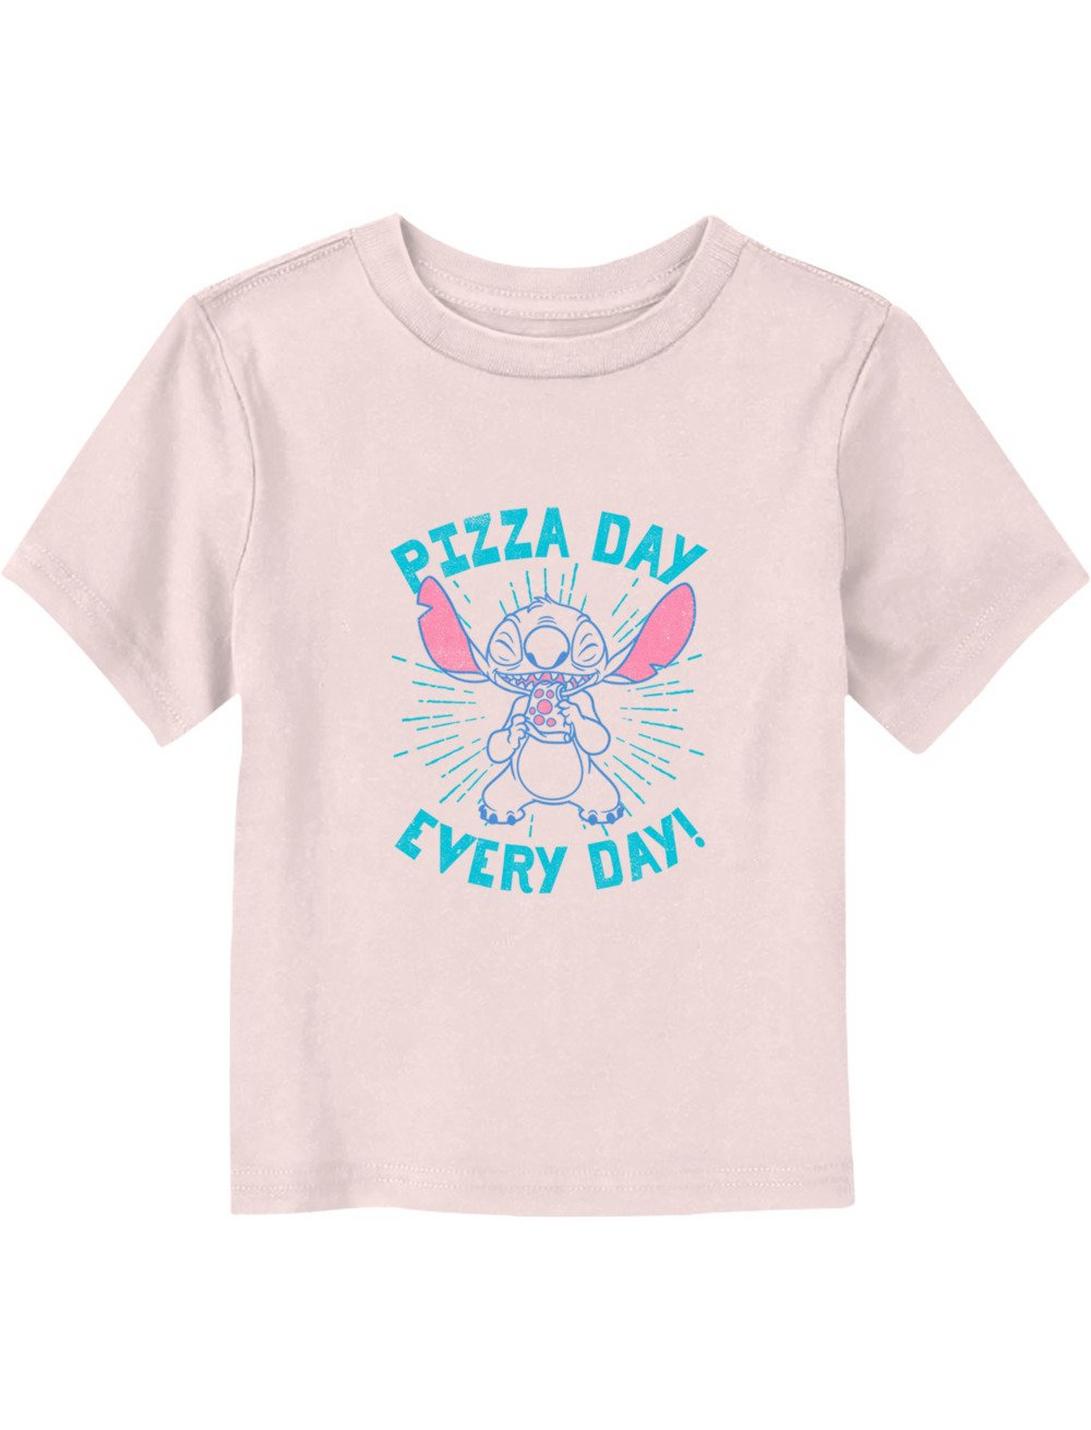 Disney Lilo & Stitch Pizza Day Every Day Toddler T-Shirt, LIGHT PINK, hi-res